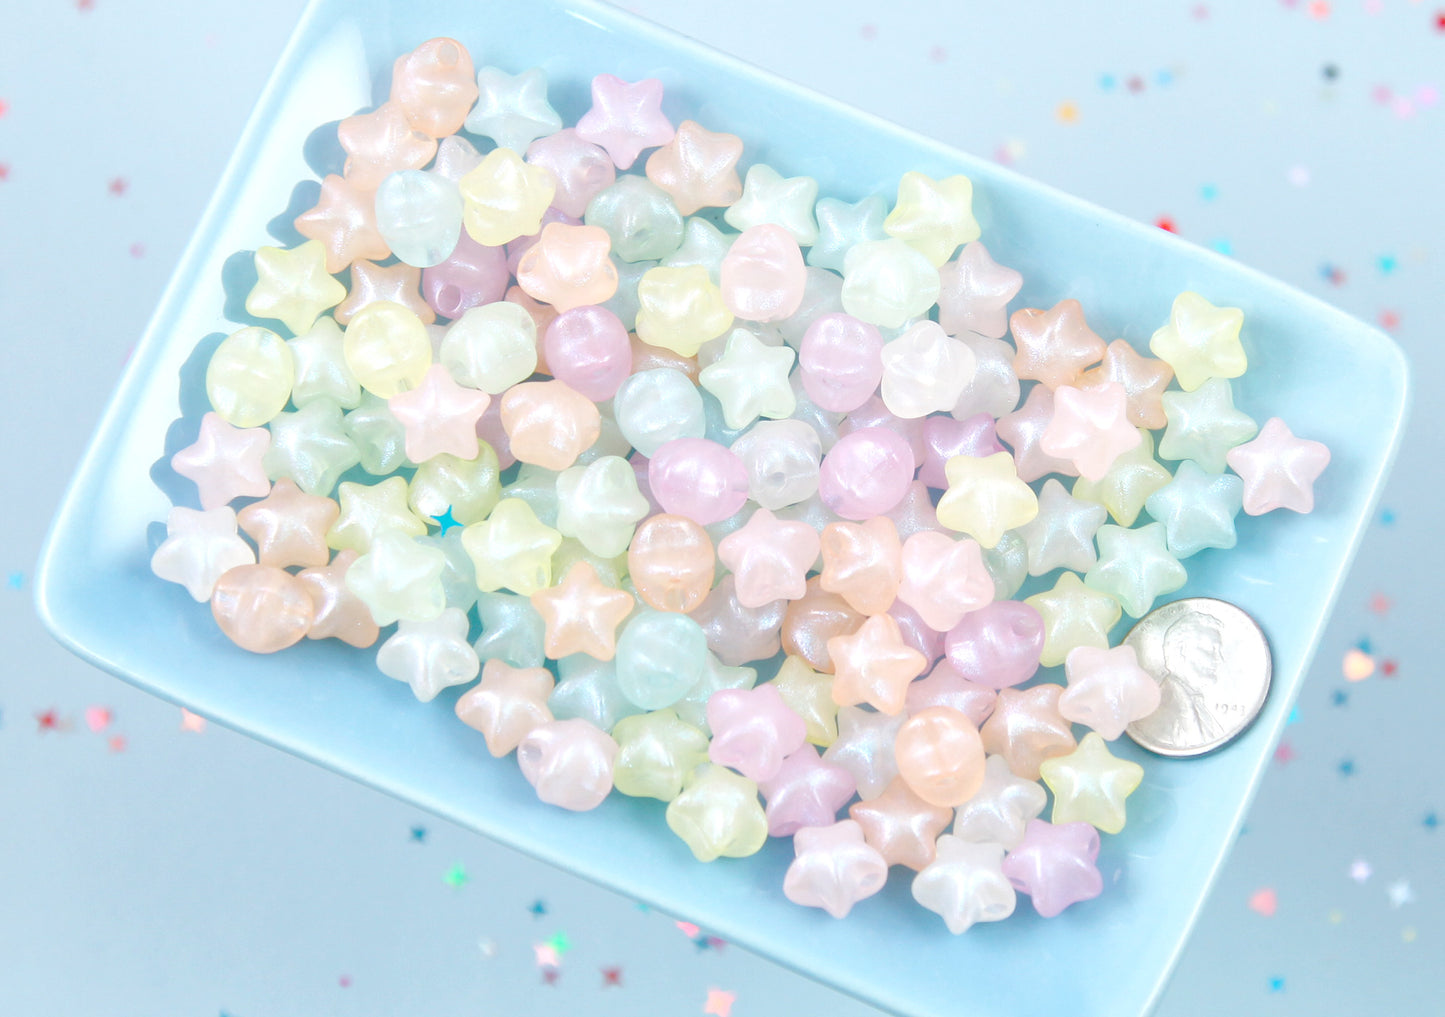 Pastel Star Beads - 11mm Pastel Shimmer 3D Star Acrylic or Resin Beads - 80 pcs set